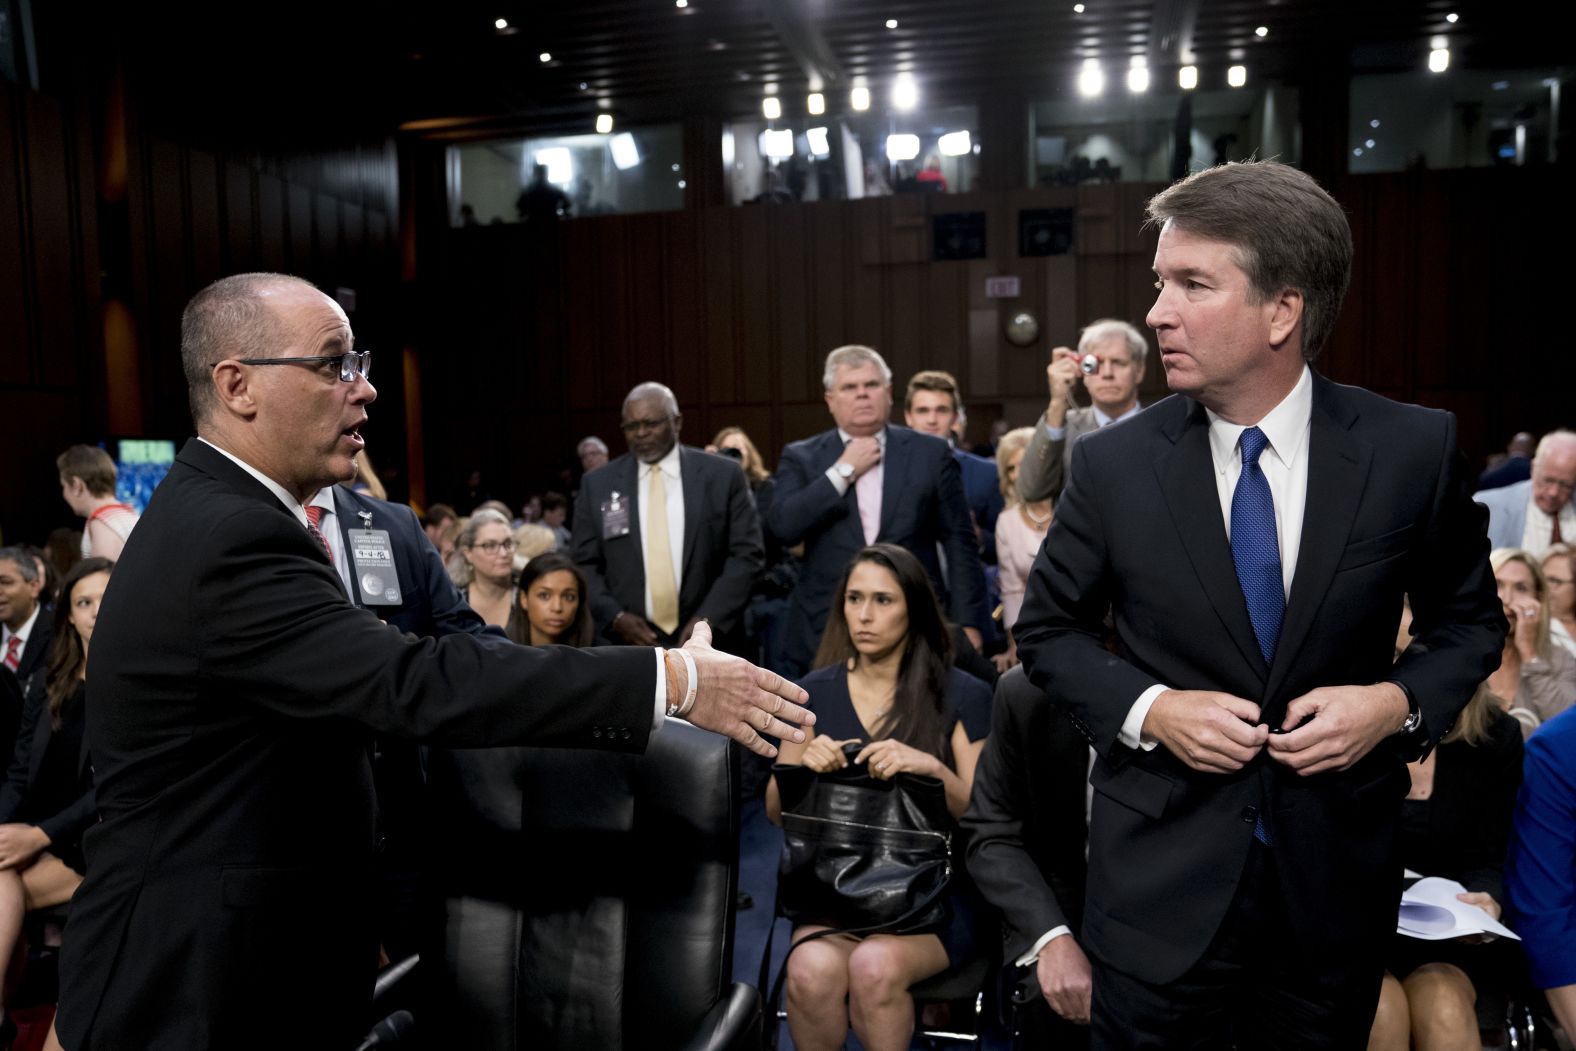 Fred Guttenberg <a href="https://www.cnn.com/politics/live-news/kavanaugh-hearing-dle/h_6e03e5036ea269b3a602ab04b4afc2a5" target="_blank">attempts to shake hands with Kavanaugh</a> as Kavanaugh leaves for a lunch break. Guttenberg is the father of Jaime Guttenberg, who was killed in the Marjory Stoneman Douglas High School shooting in Parkland, Florida, earlier this year. <a href="https://twitter.com/fred_guttenberg/status/1037023269923287041" target="_blank" target="_blank">Guttenberg said on Twitter</a> that Kavanaugh "pulled his hand back, turned his back to me and walked away." A source familiar with the encounter said that Kavanaugh did not know who Guttenberg was and security intervened to end the exchange before there could be a handshake. White House spokesman Raj Shah <a href="https://twitter.com/RajShah45/status/1037040825778274306" target="_blank" target="_blank">also tweeted</a> that security intervened before Kavanaugh could shake Guttenberg's hand.